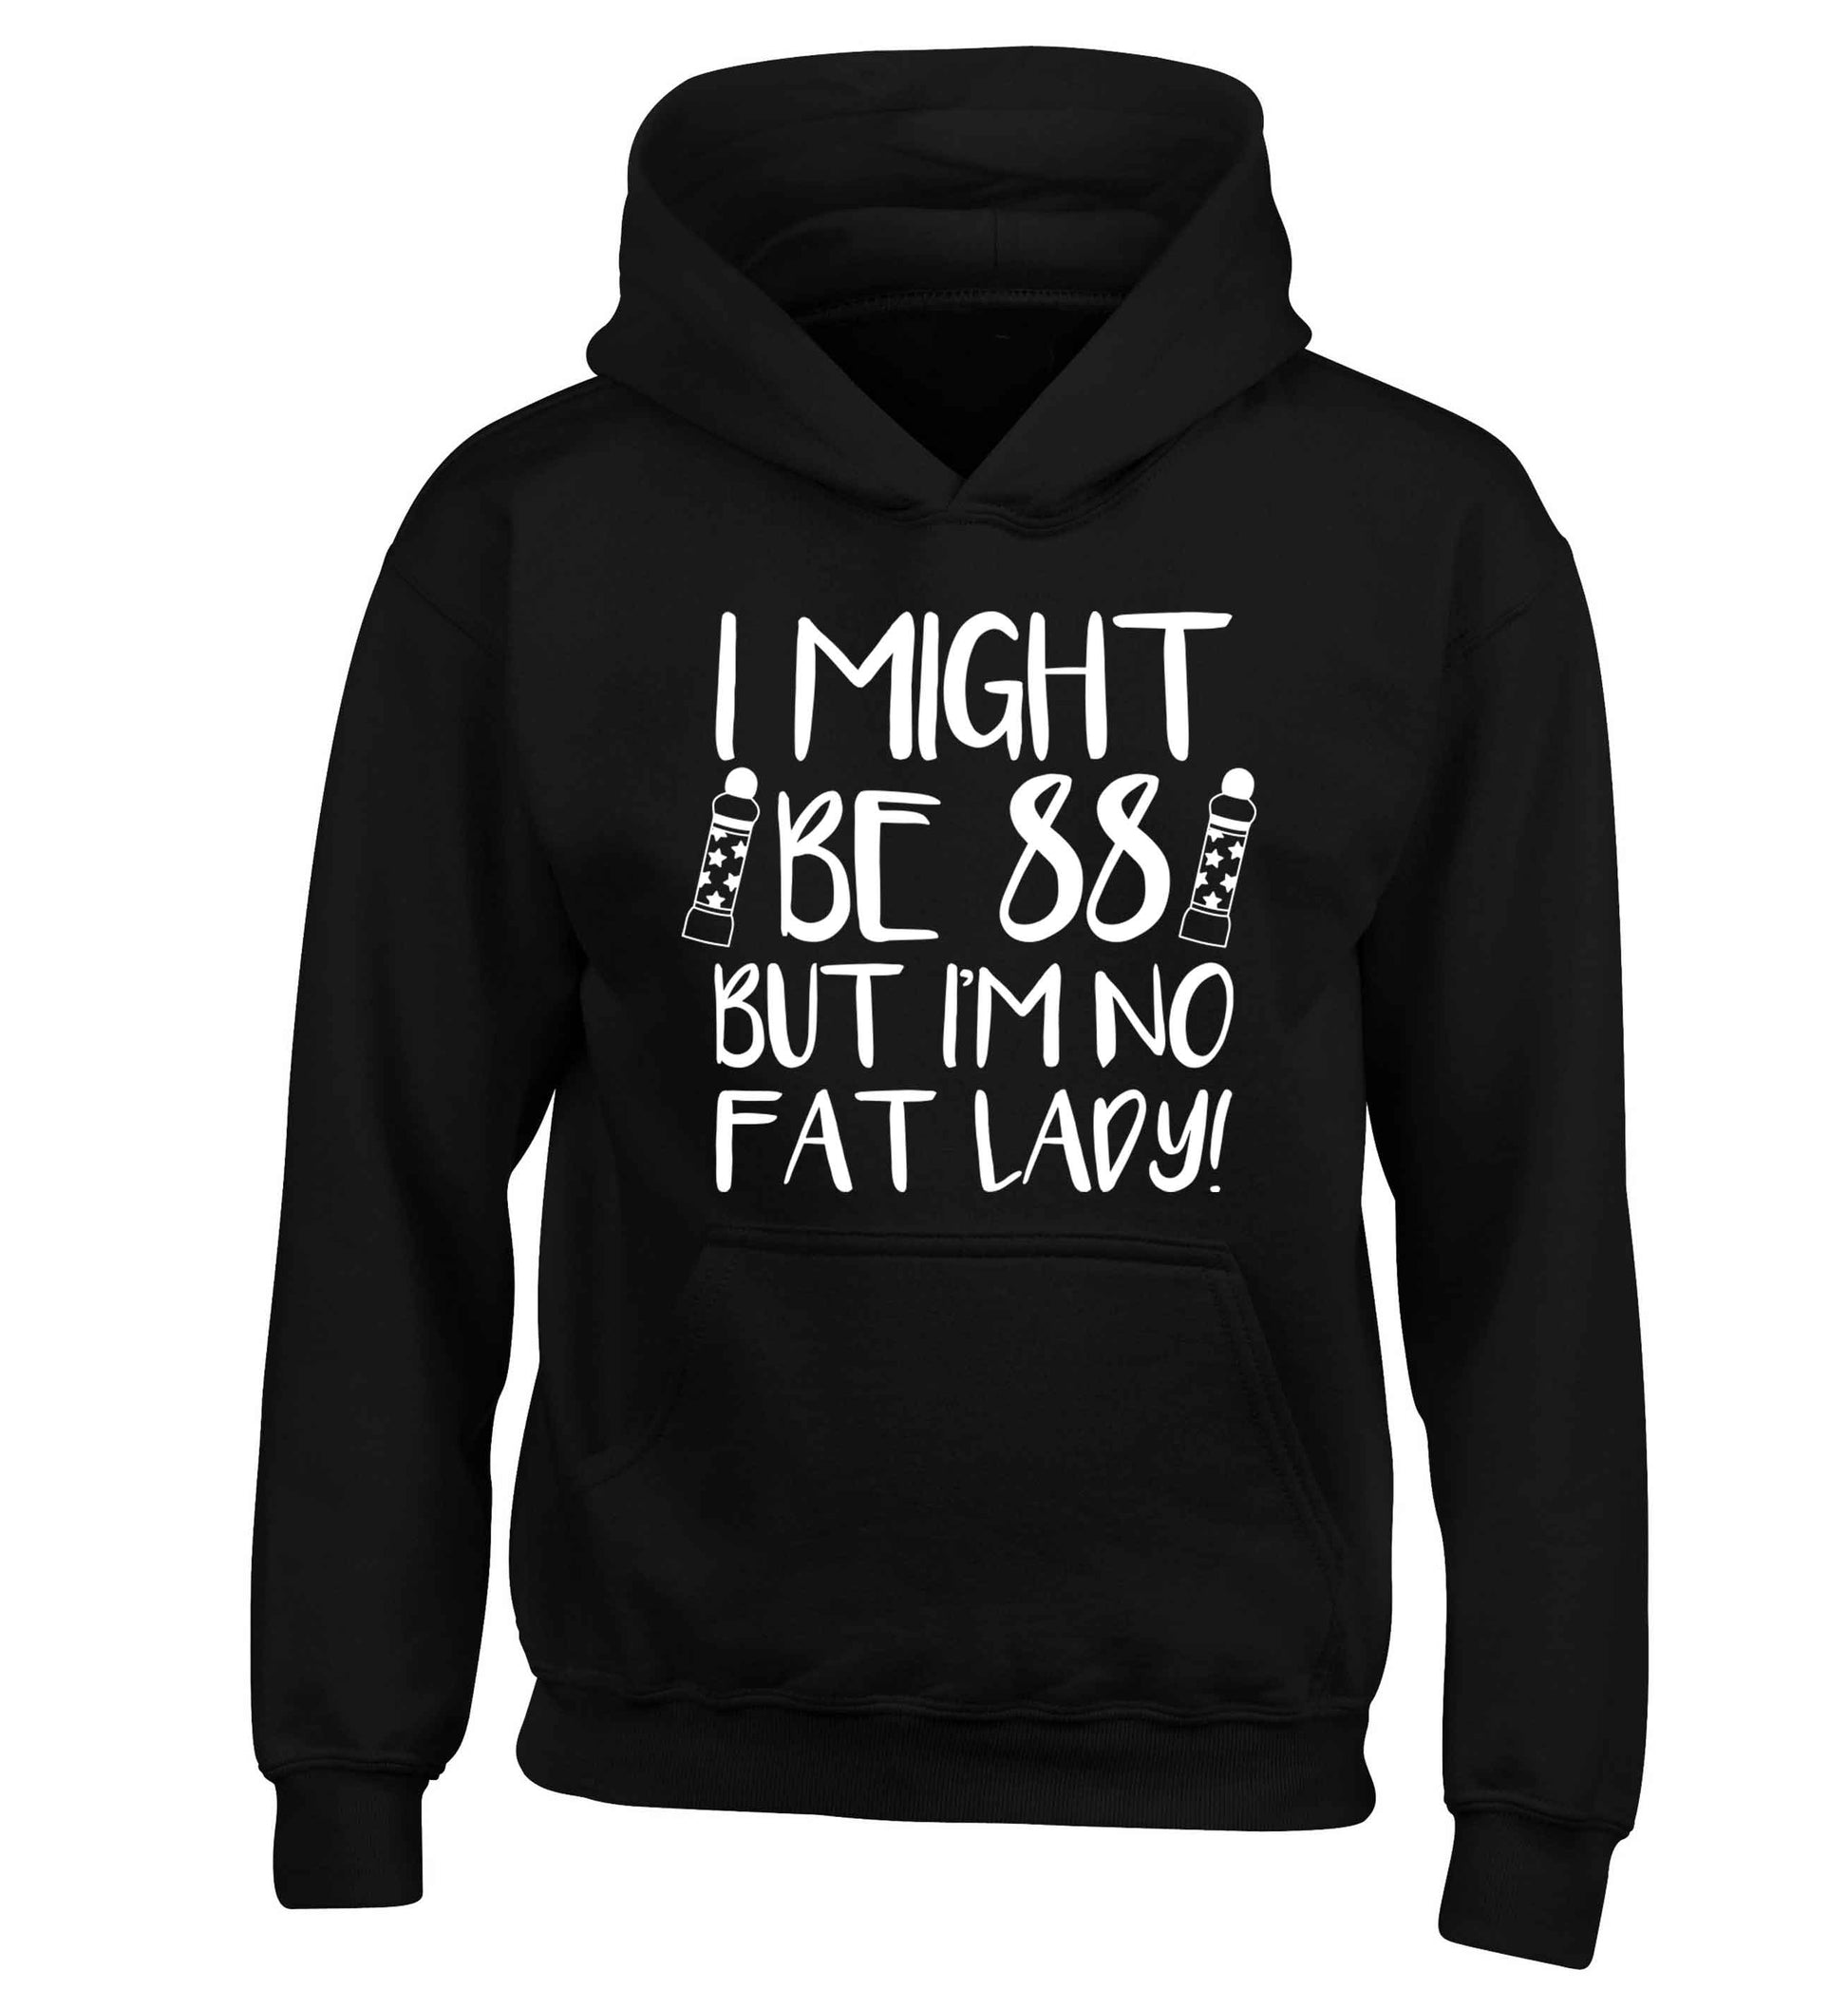 I might be 88 but I'm no fat lady children's black hoodie 12-13 Years